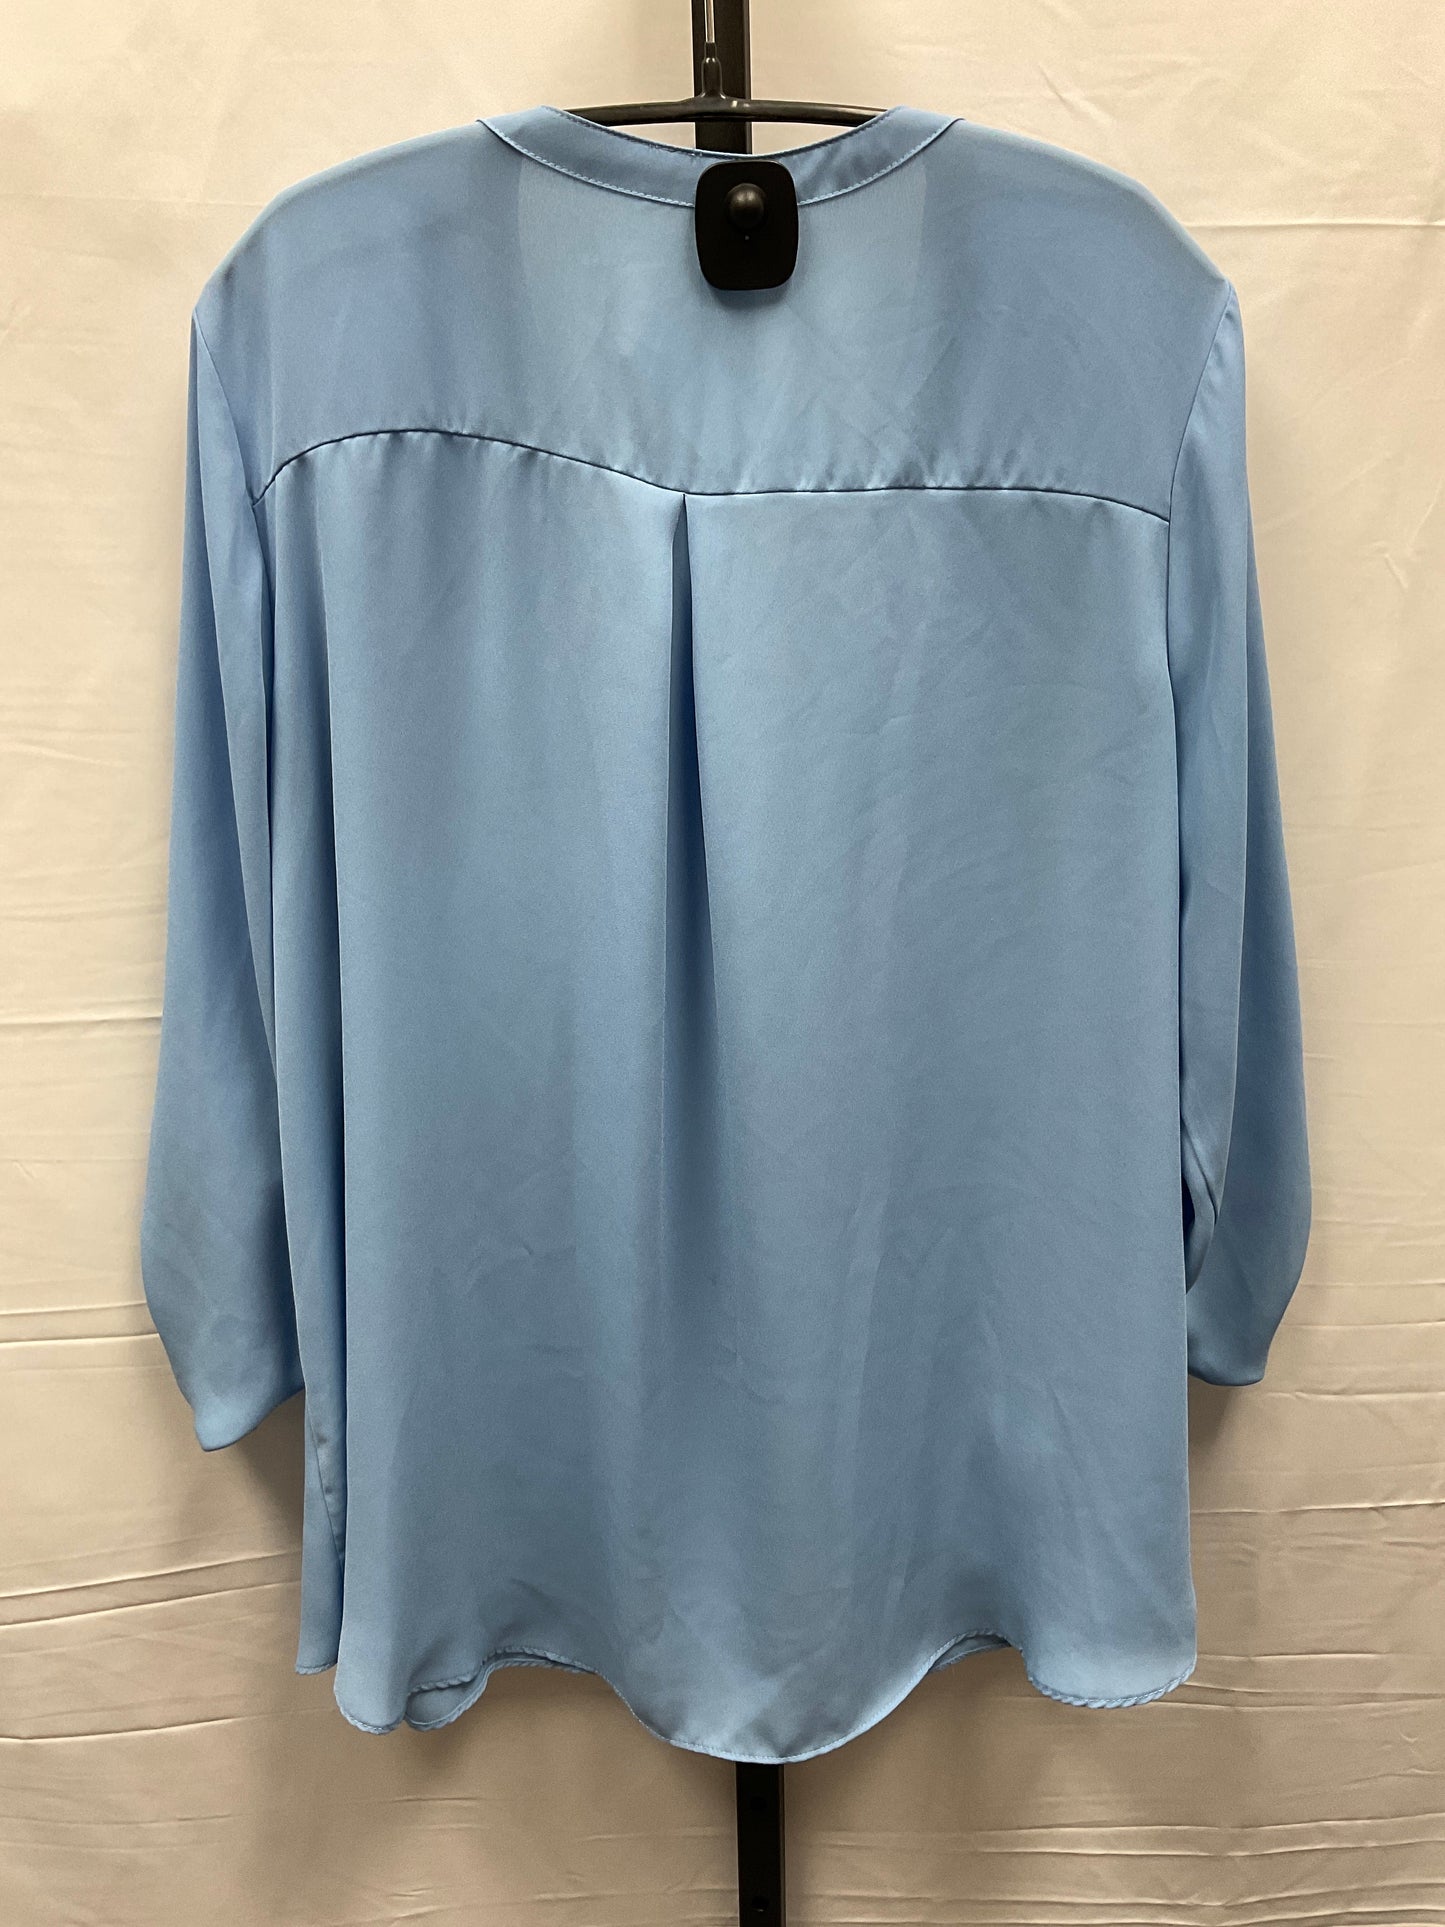 Top Long Sleeve By Cato  Size: 1x